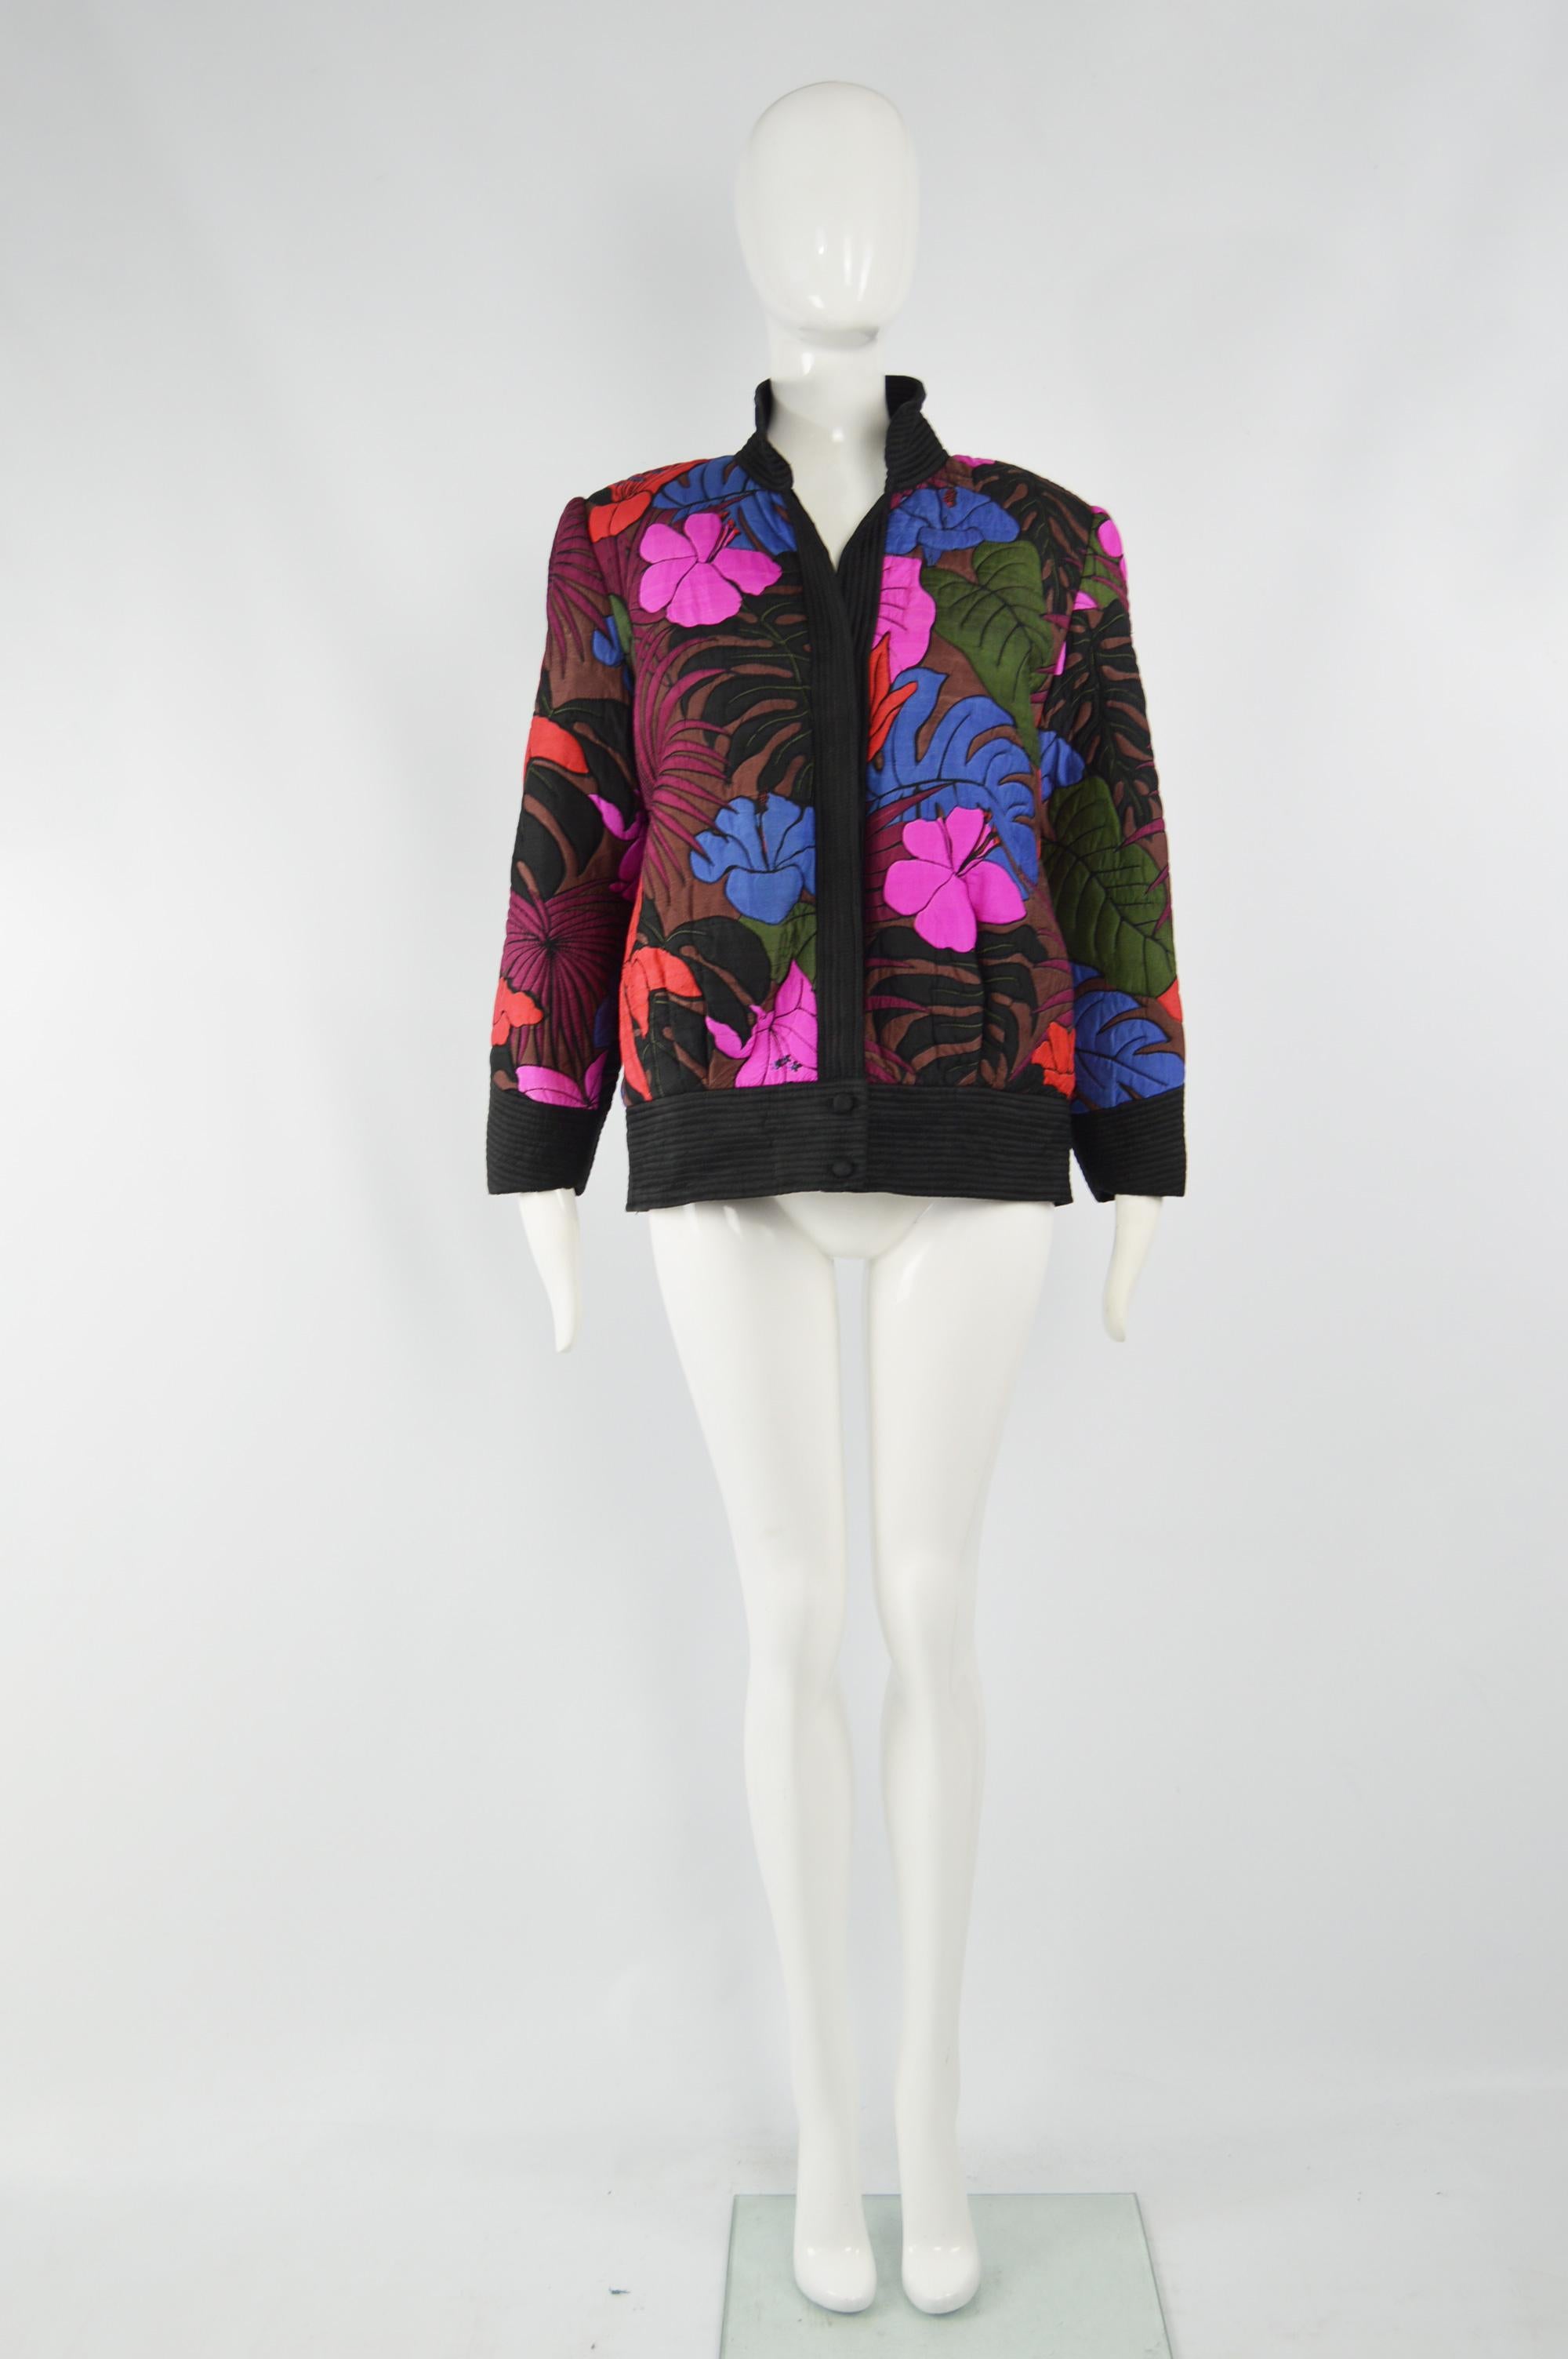 A beautiful vintage womens jacket from the 80s made from a colorful pure Thai silk with lightly hand worked quilting to create a textured, floral effect. It has no closures and is meant to nonchalantly drape open. It has shoulder pads which add to